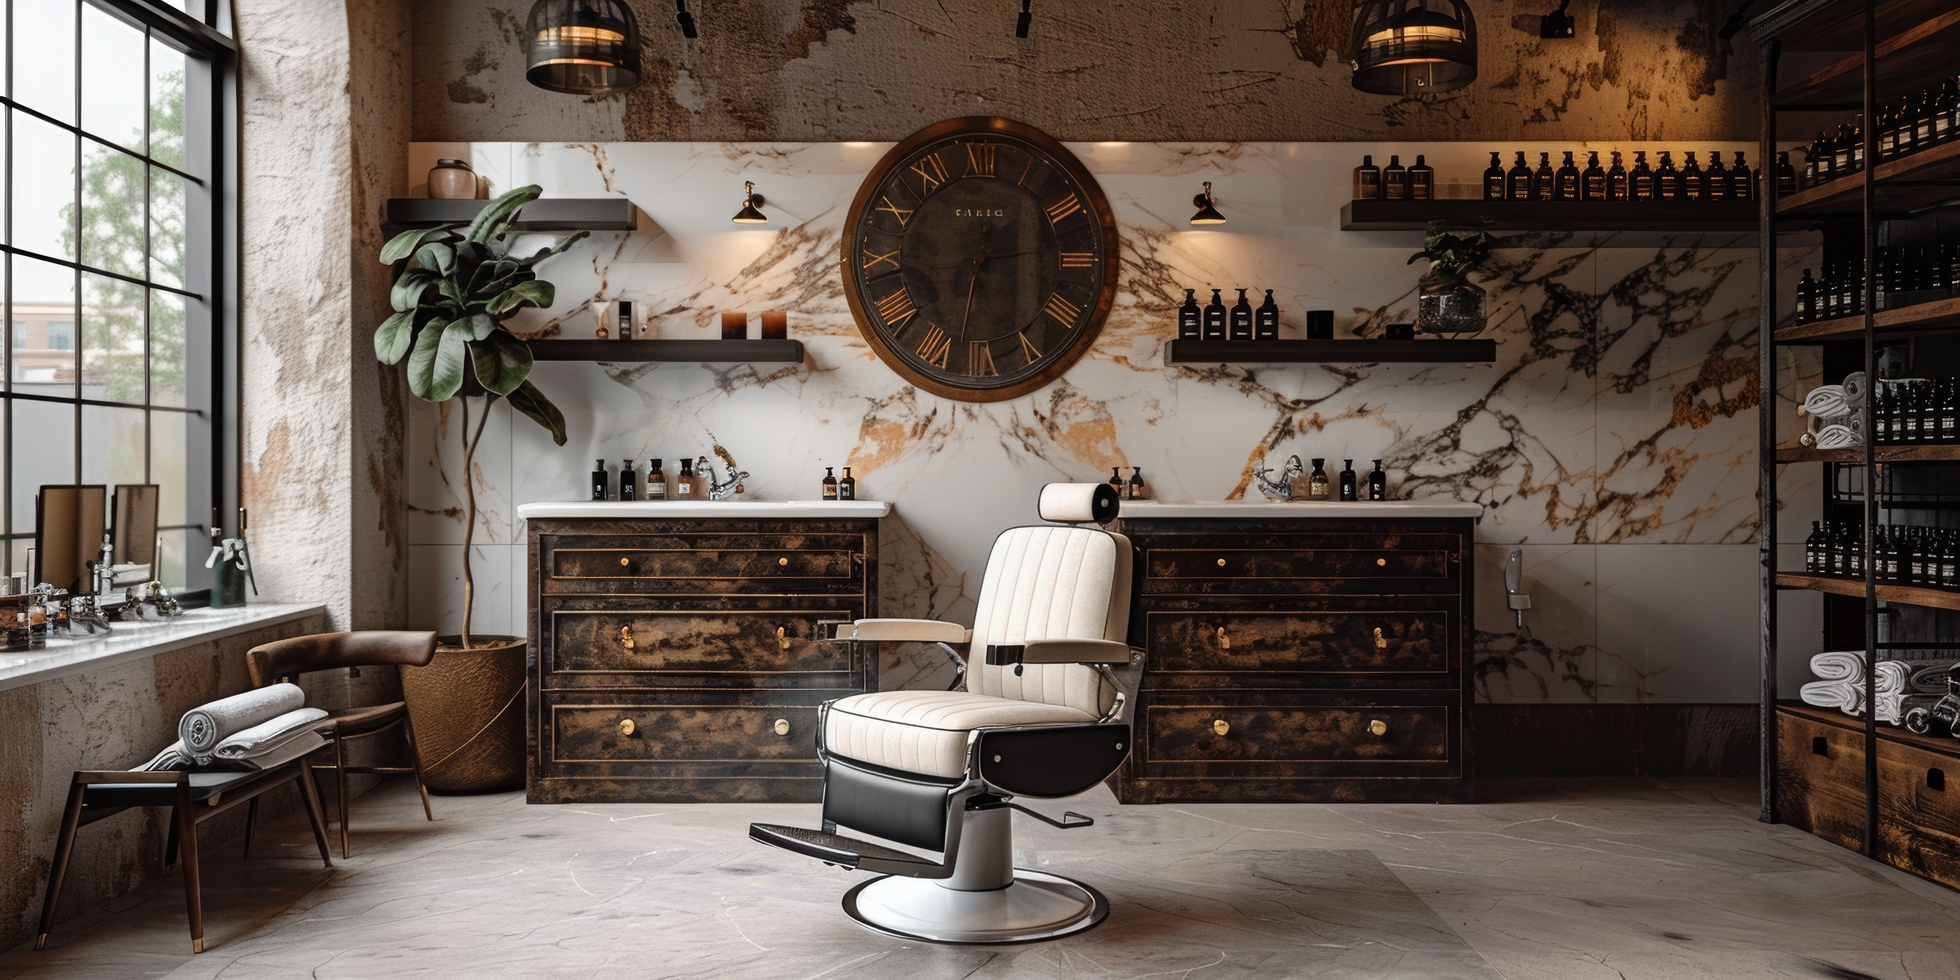 What are the main characteristics of a good barber chair?